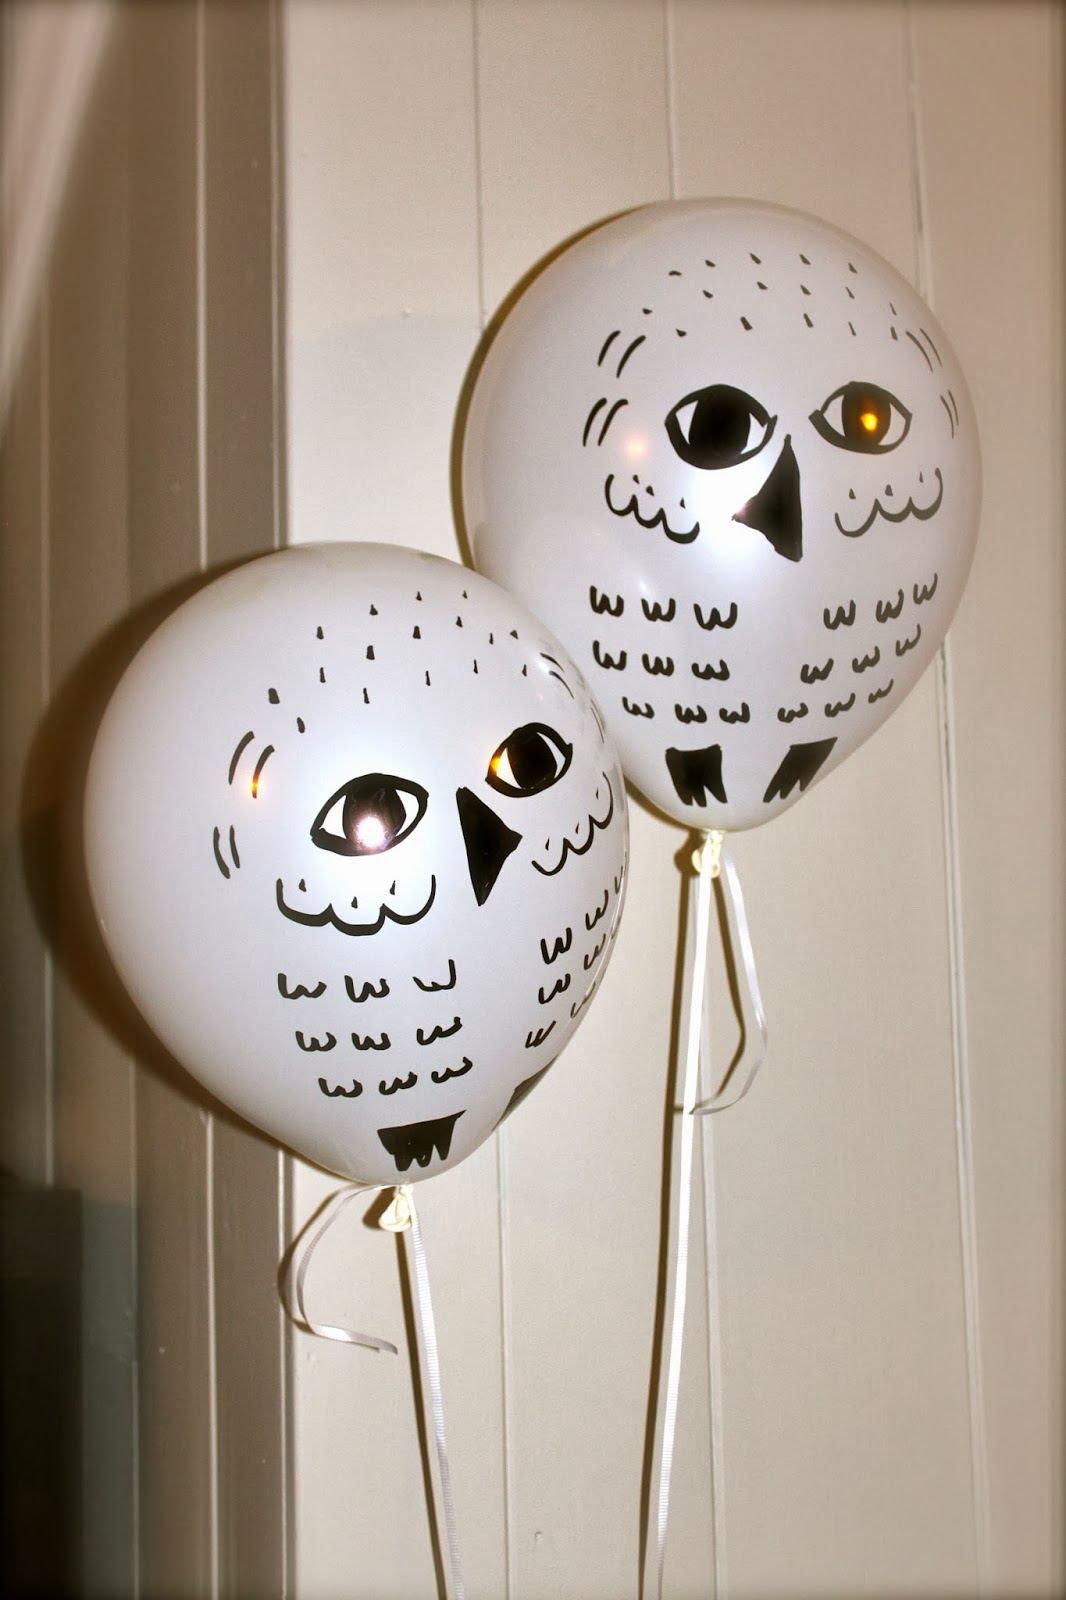 Ine Twist - This birthday celebration was all about Harry Potter. These XL  Hermione & Hedwig balloon sculptures were the special Birthday balloons  made for twin birthday girls who both love Harry